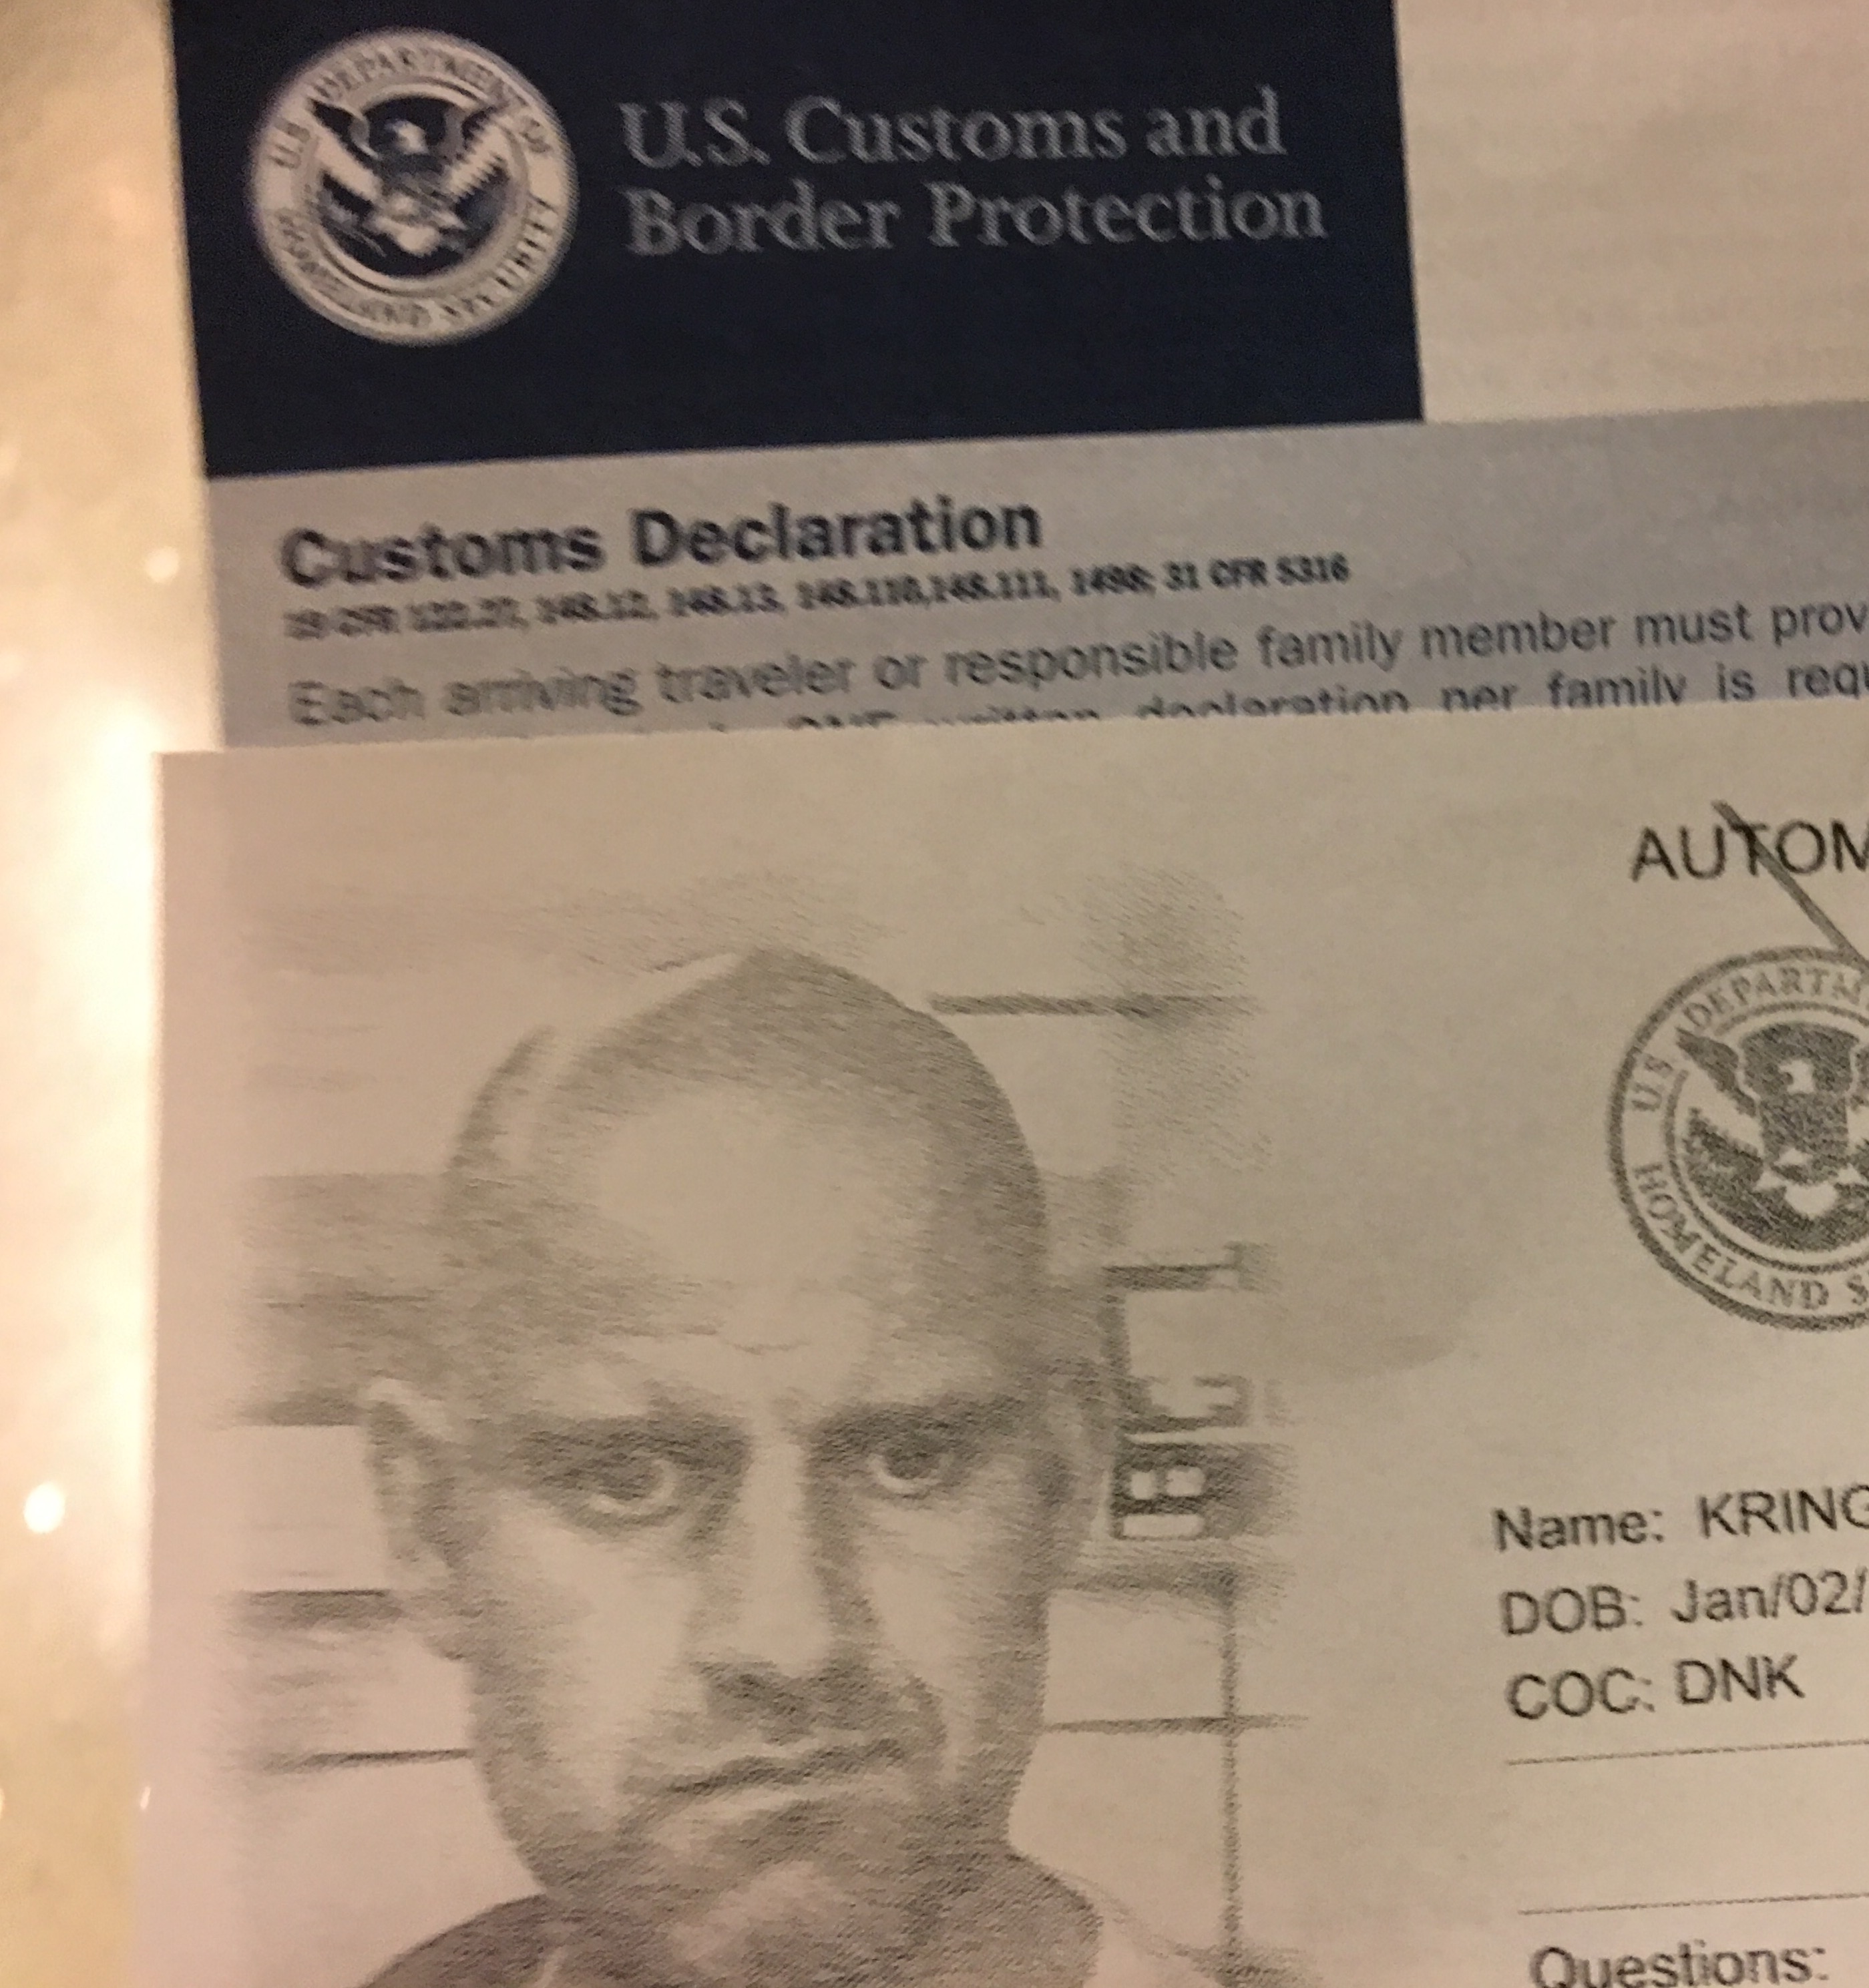 Customs in the US, can be a farkery